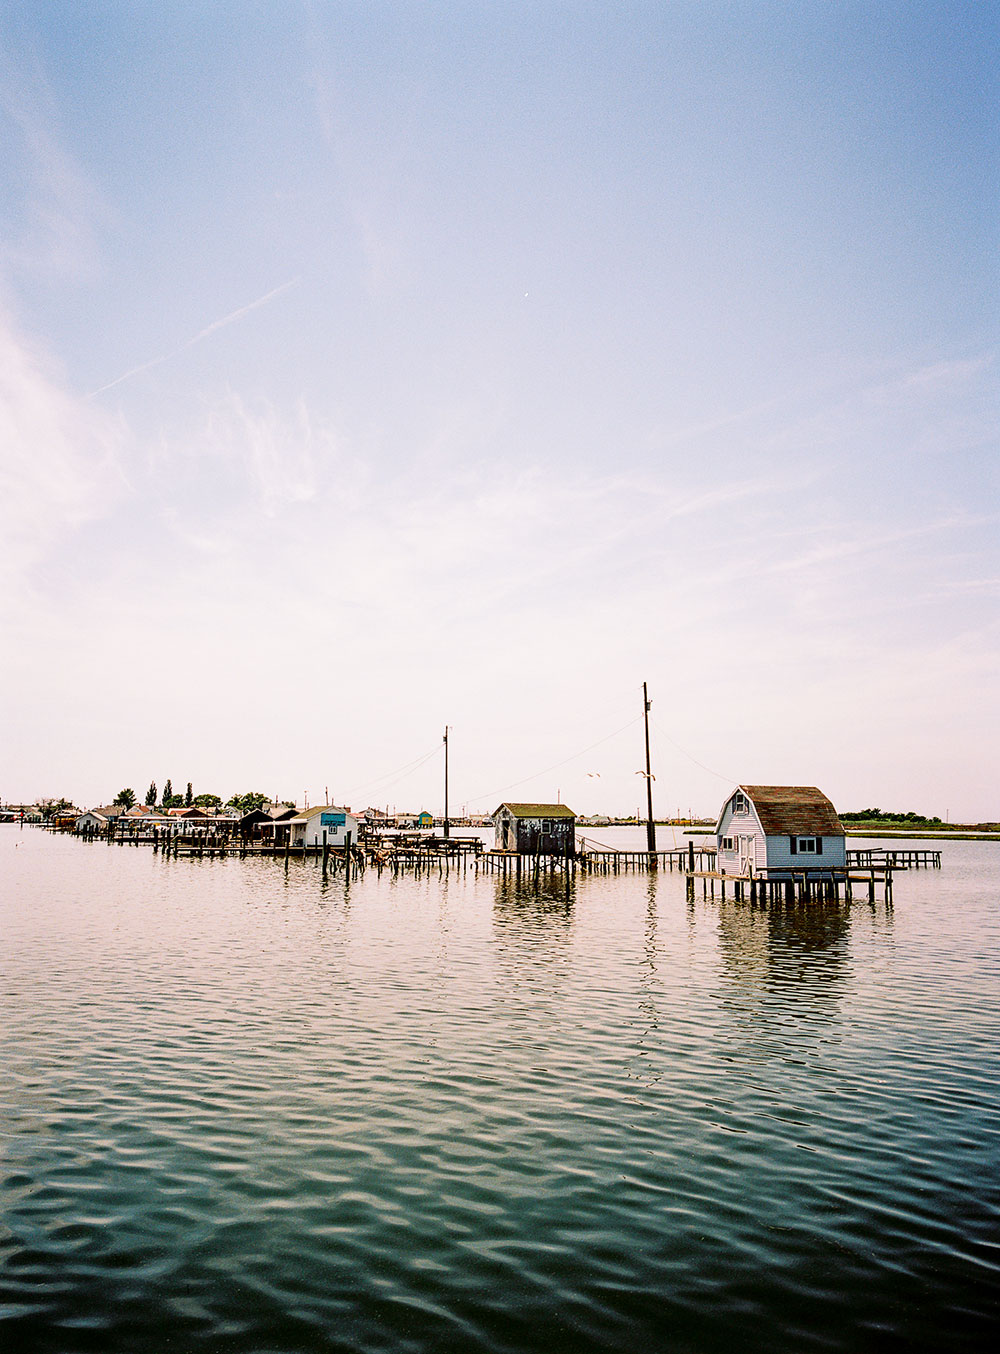 Photograph by Gunner Hughes of houses on stilts at Tangier Island, Chesapeake Bay